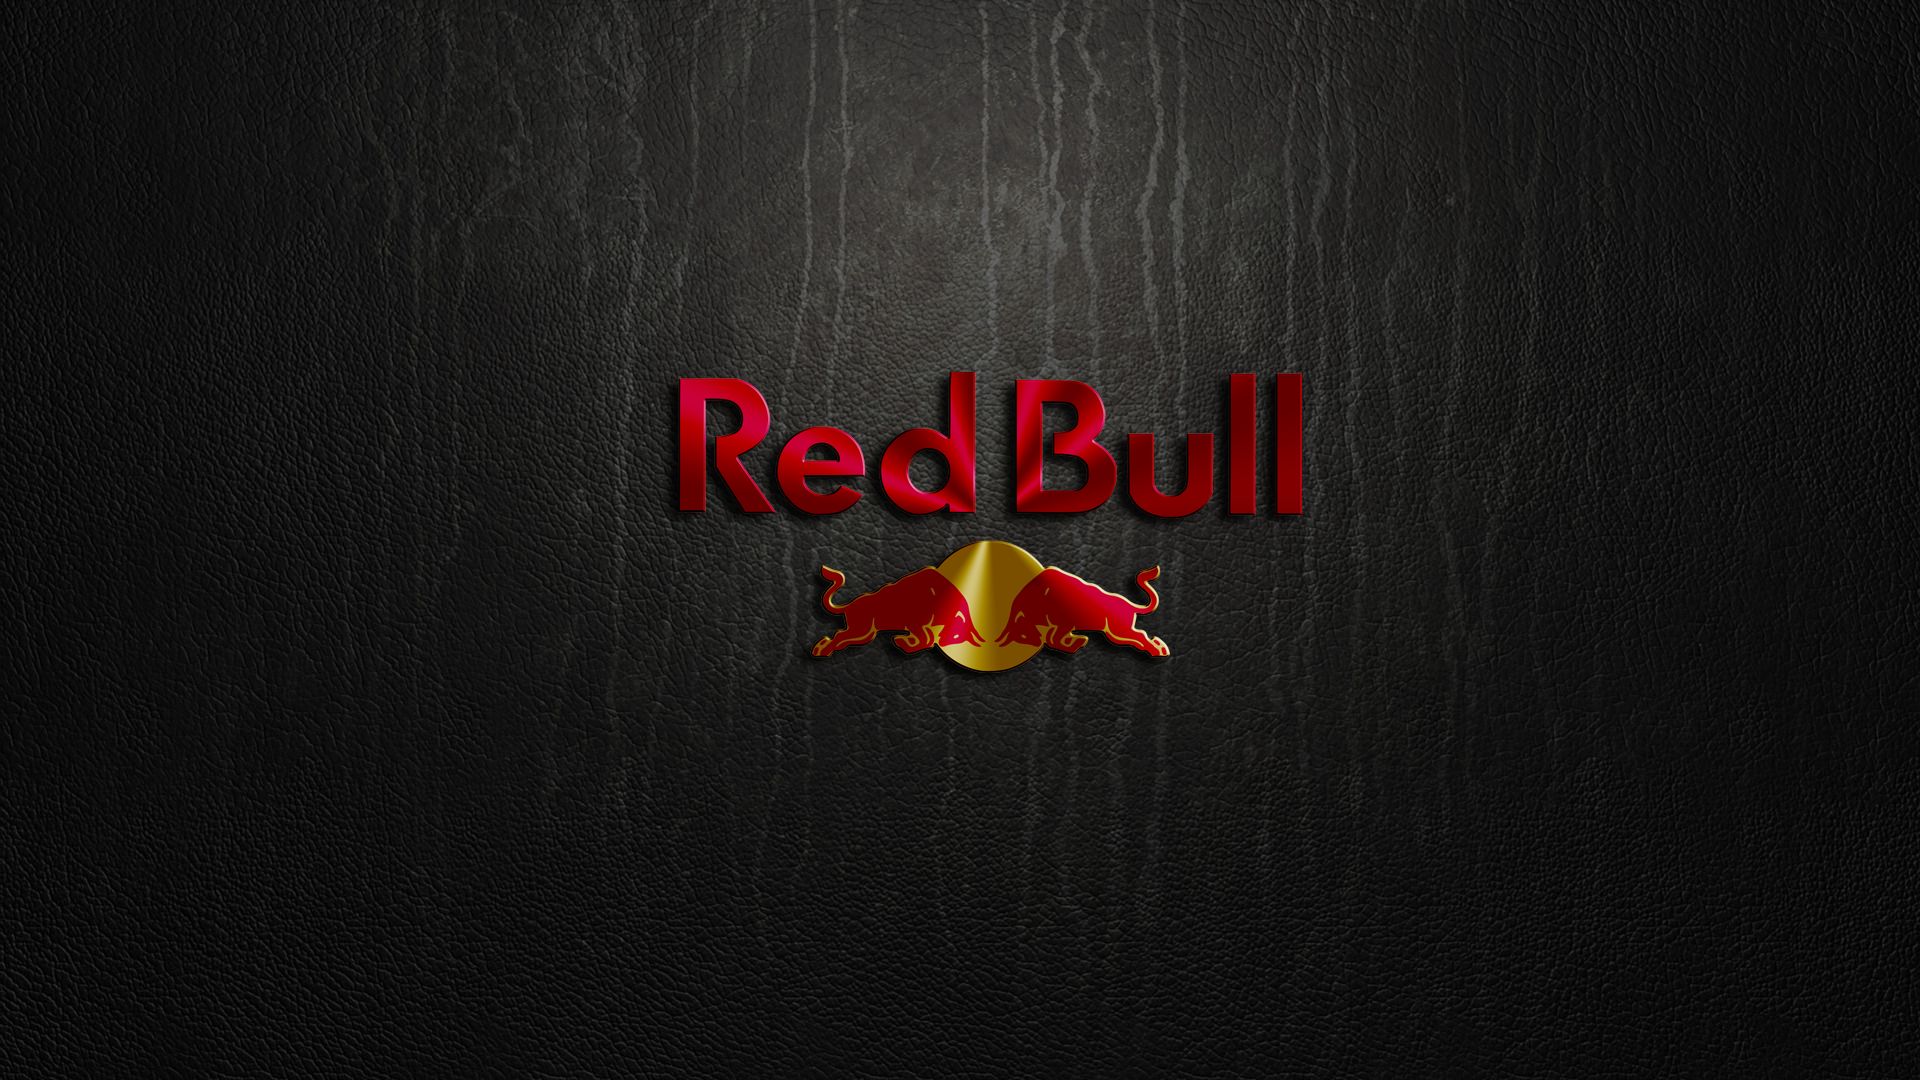 products, red bull